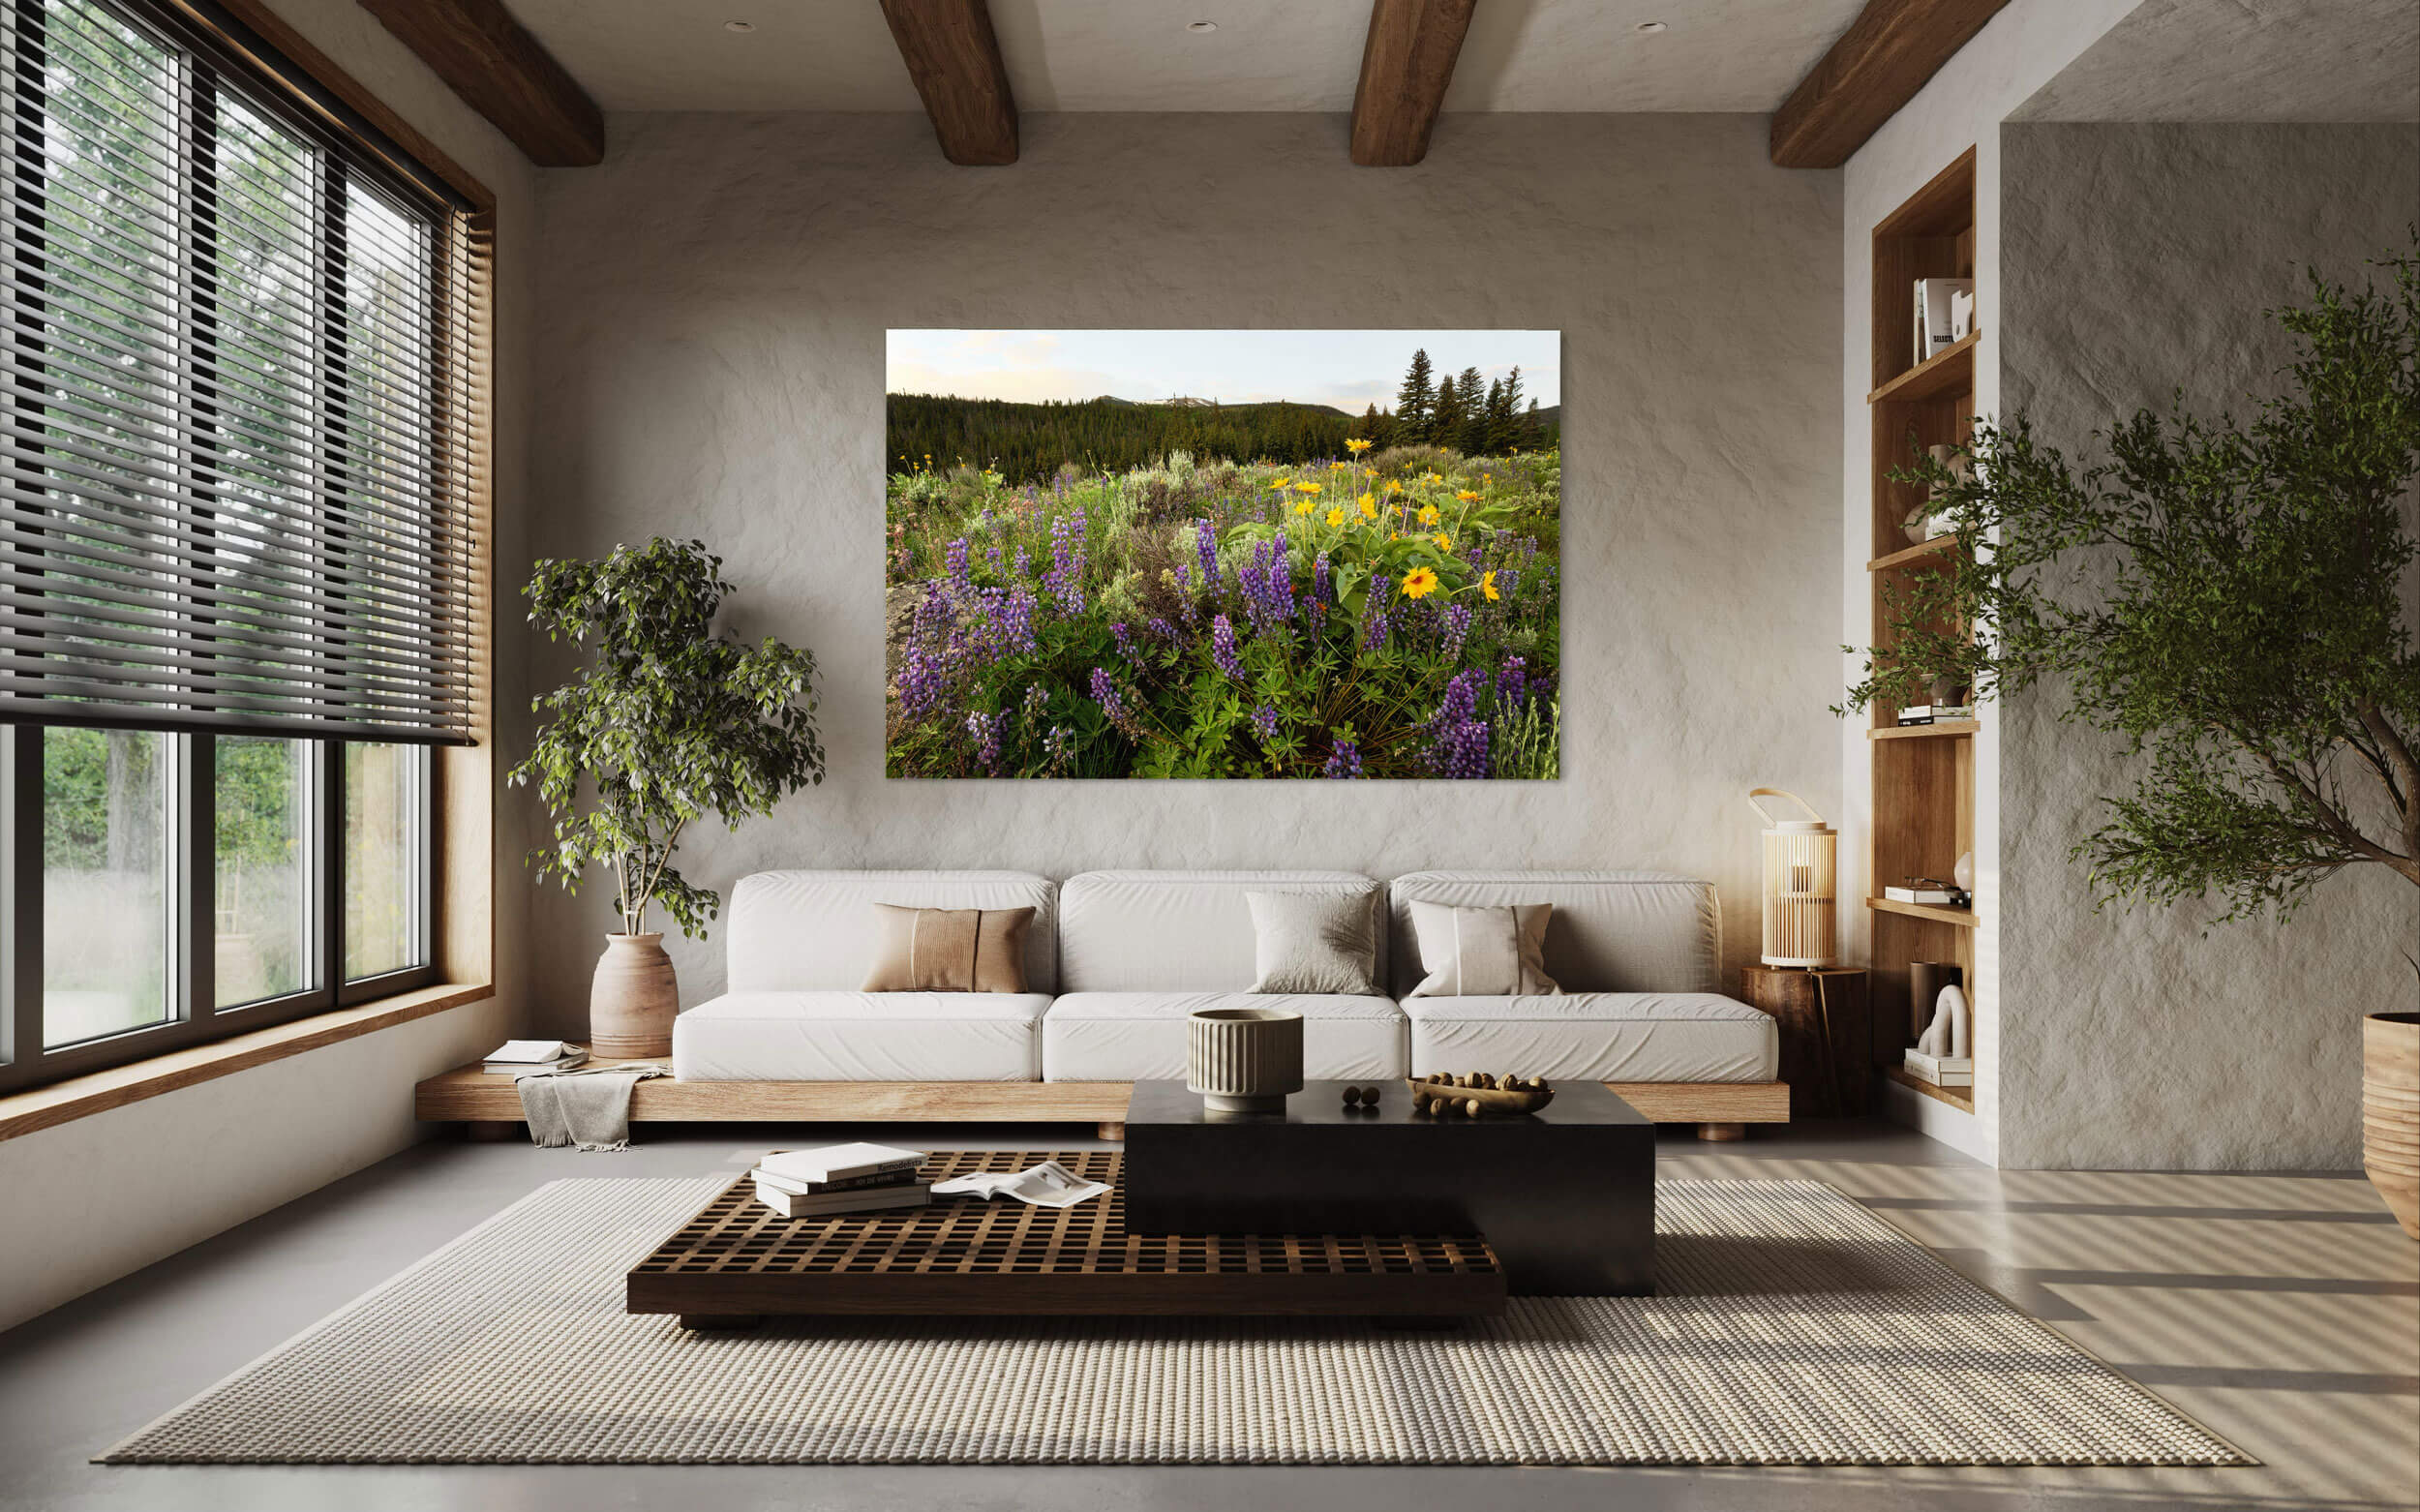 This Colorado wildflowers picture hangs in a living room as a piece of Colorado art.